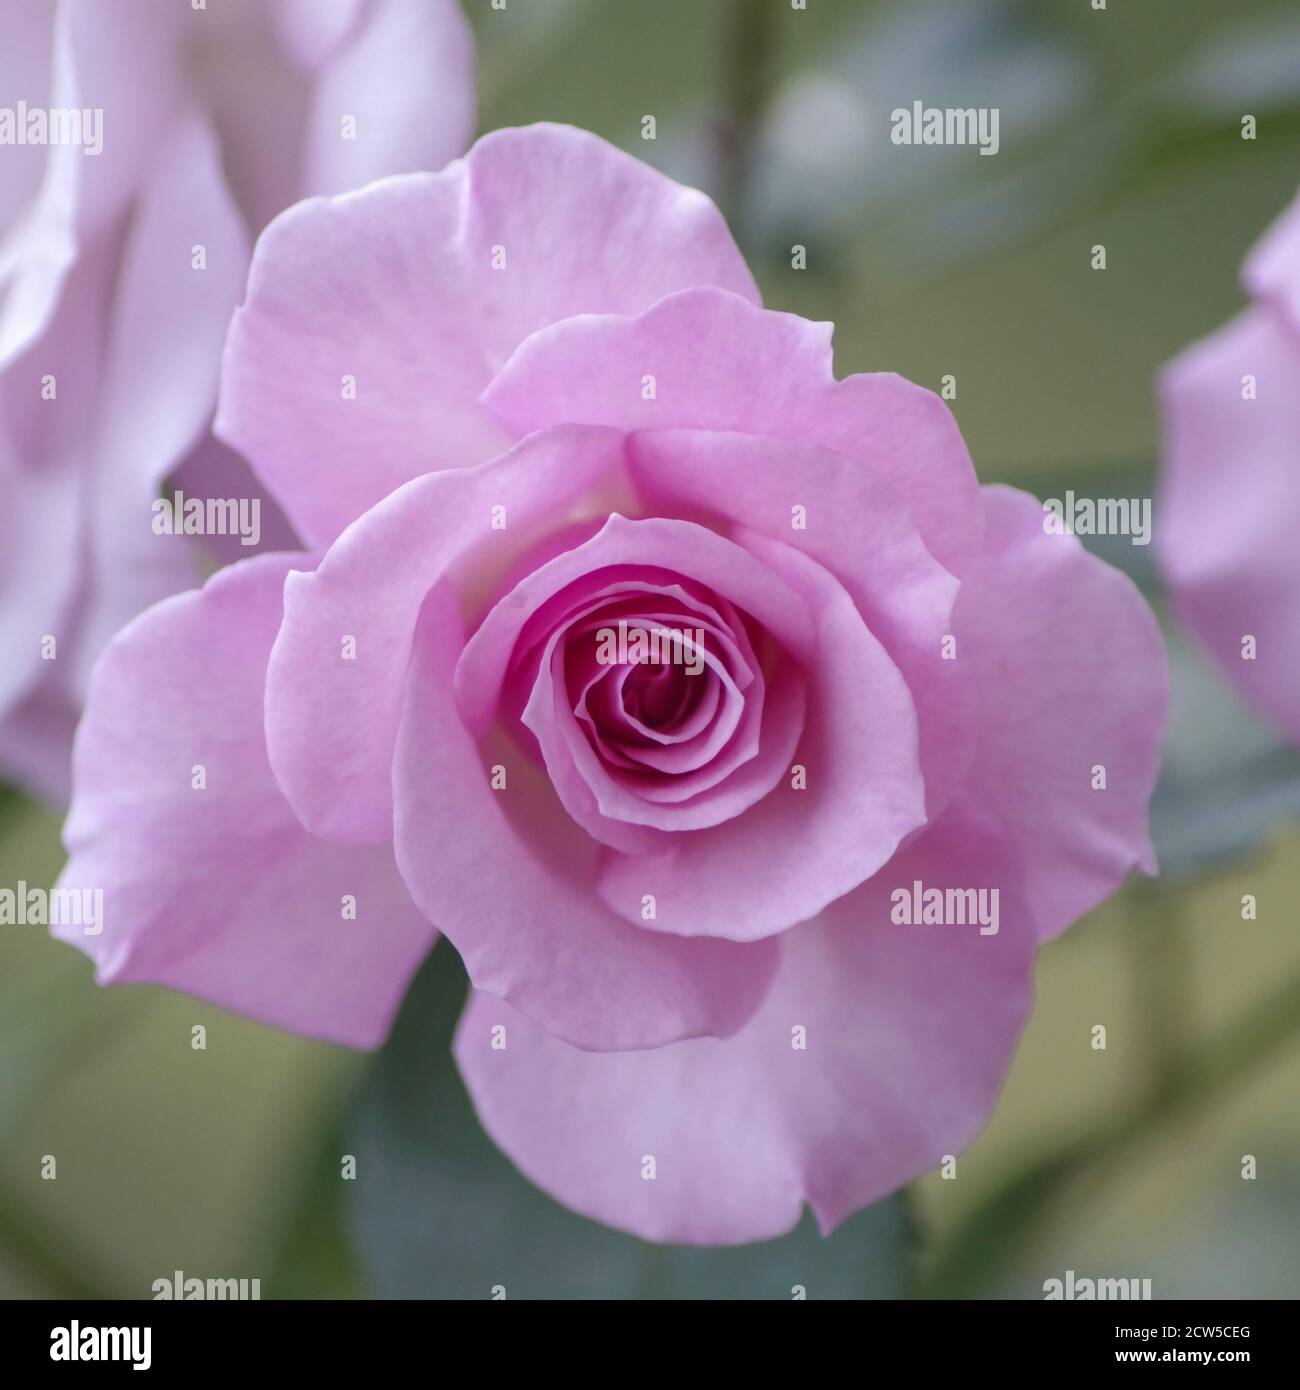 Subtle color variations and texture in this macro image, selective focus on center of rose, abstract bokeh defocused green background with garden shap Stock Photo